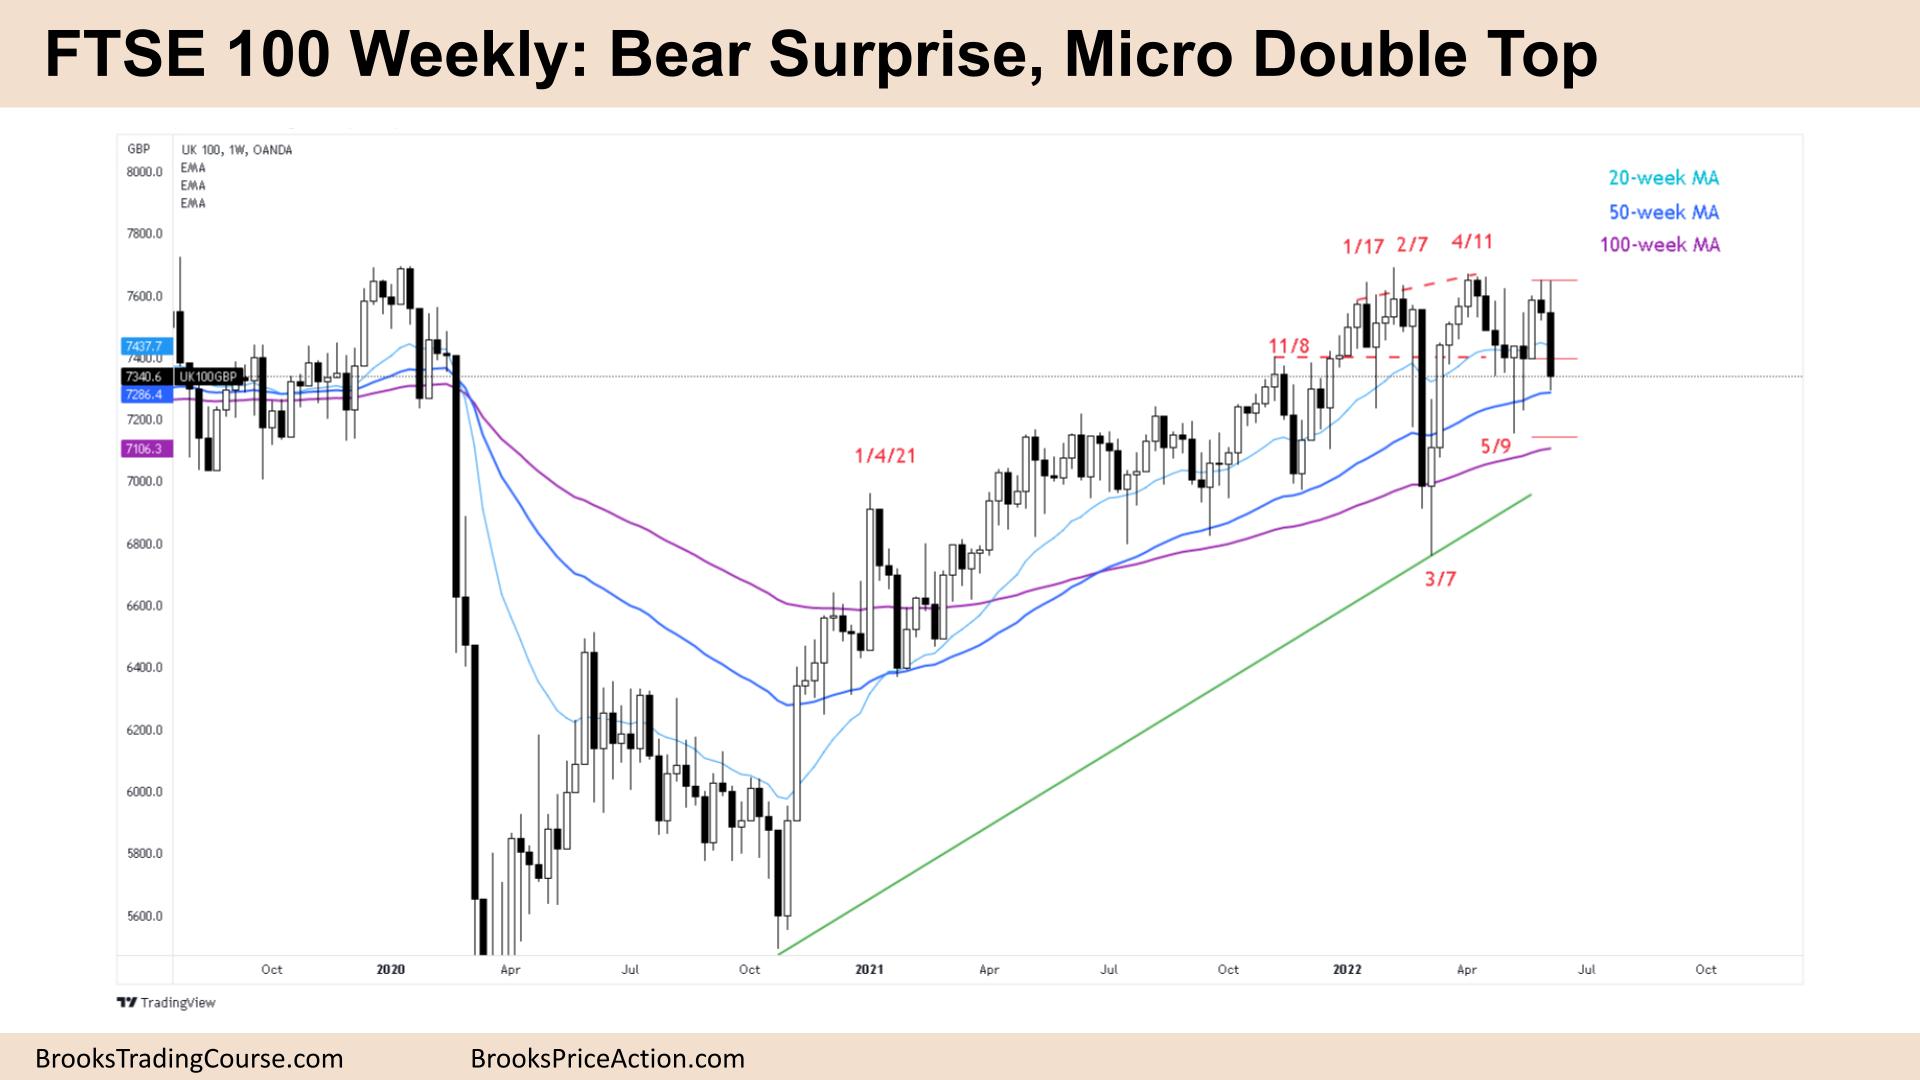 FTSE 100 Bear Surprise and Micro Double Top on Weekly Chart.jpg